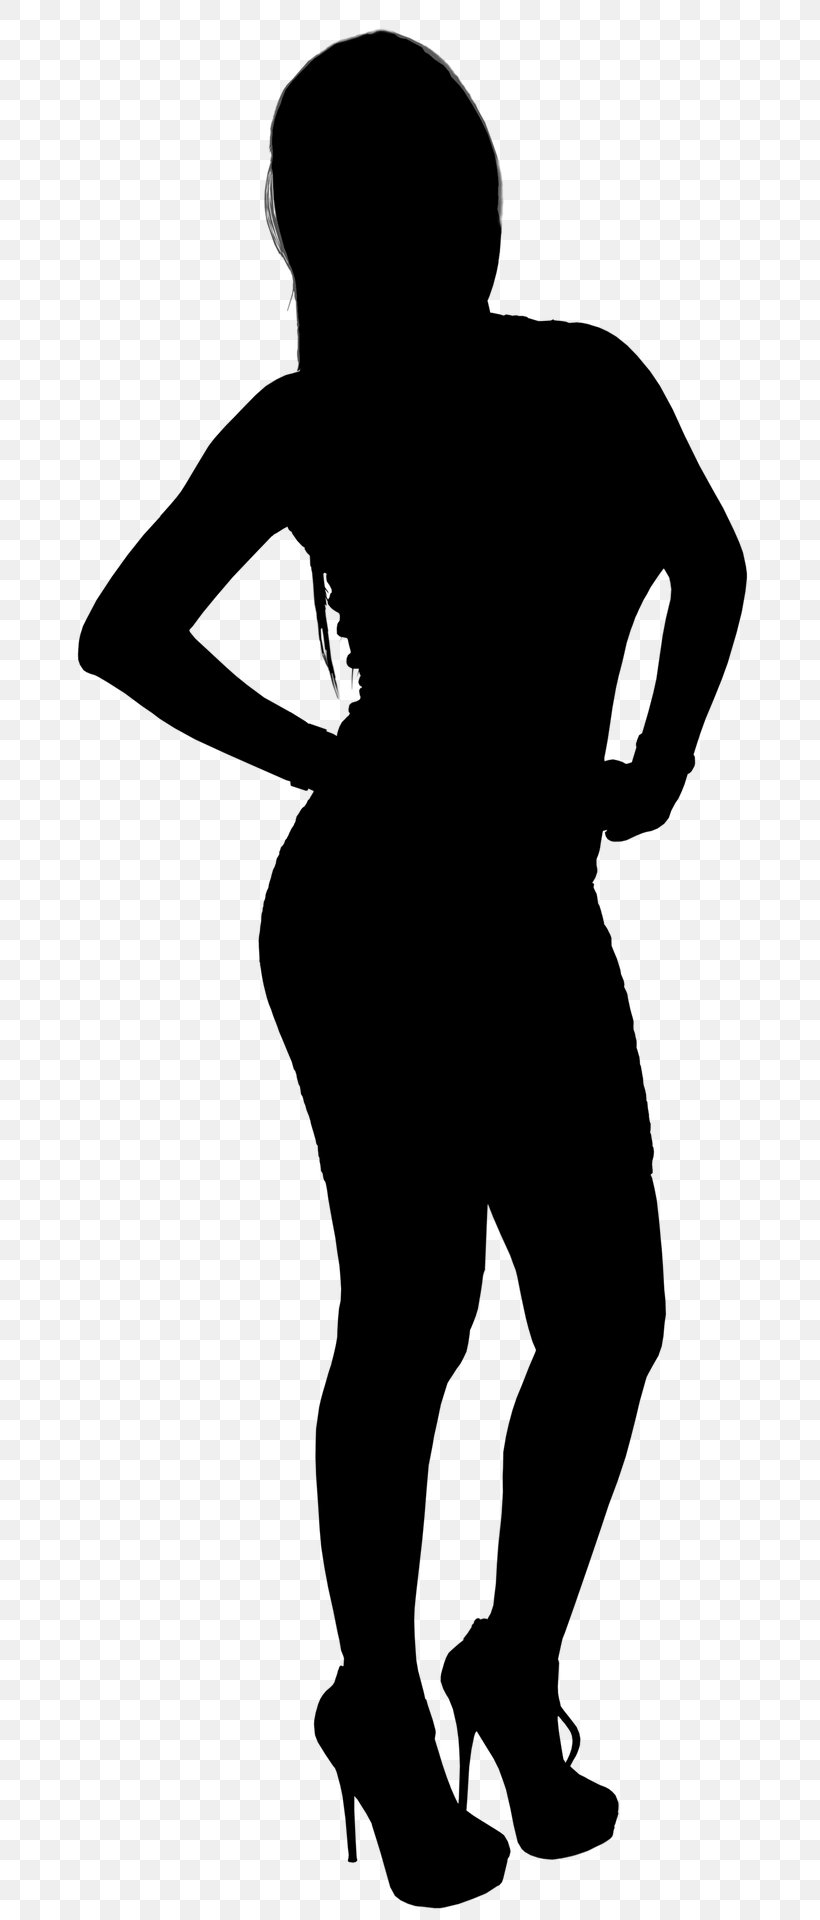 Vector Graphics Clip Art Silhouette Image, PNG, 711x1920px, Silhouette, Black, Blackandwhite, Drawing, Hand Download Free